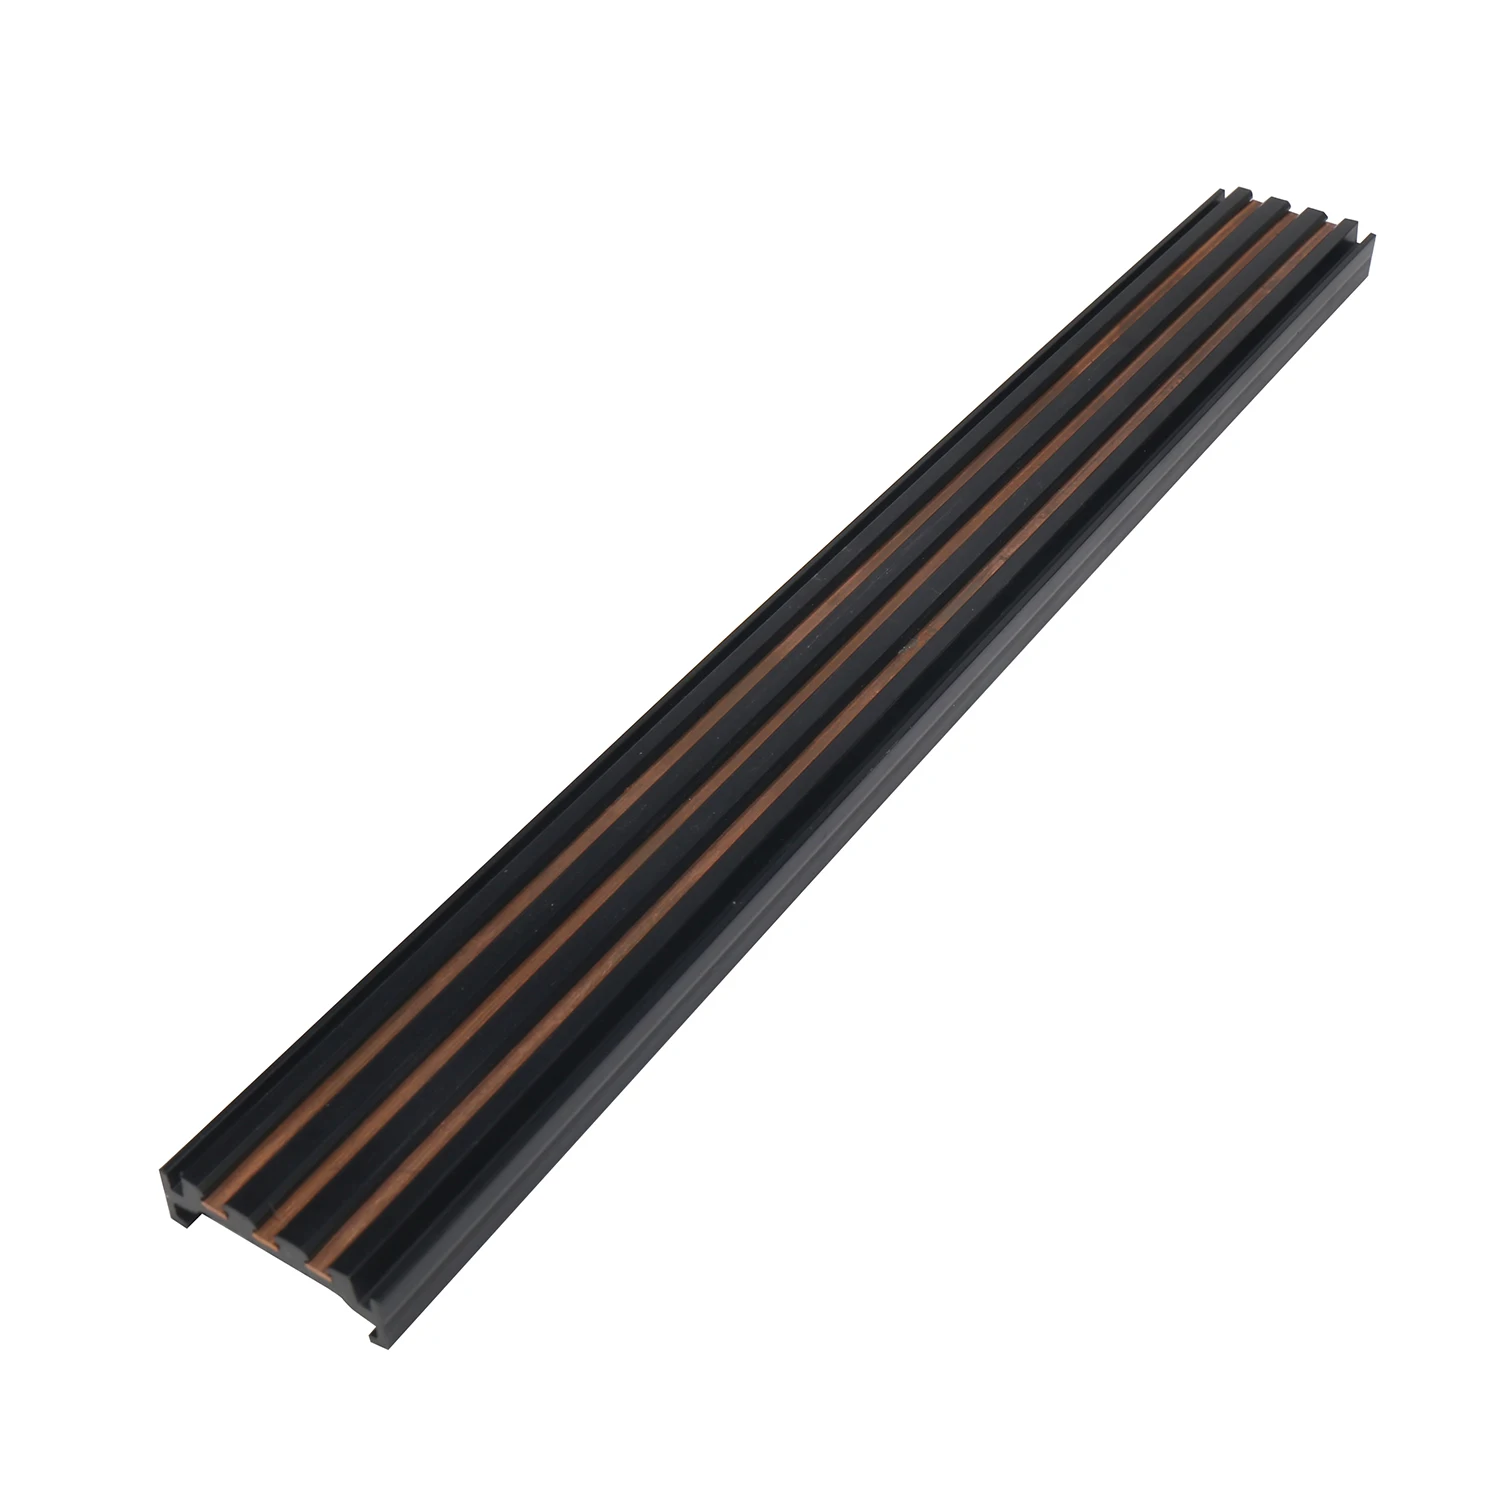 OEM customized  pvc abs and copper brass  extrusion  conducting bar conductive accessories